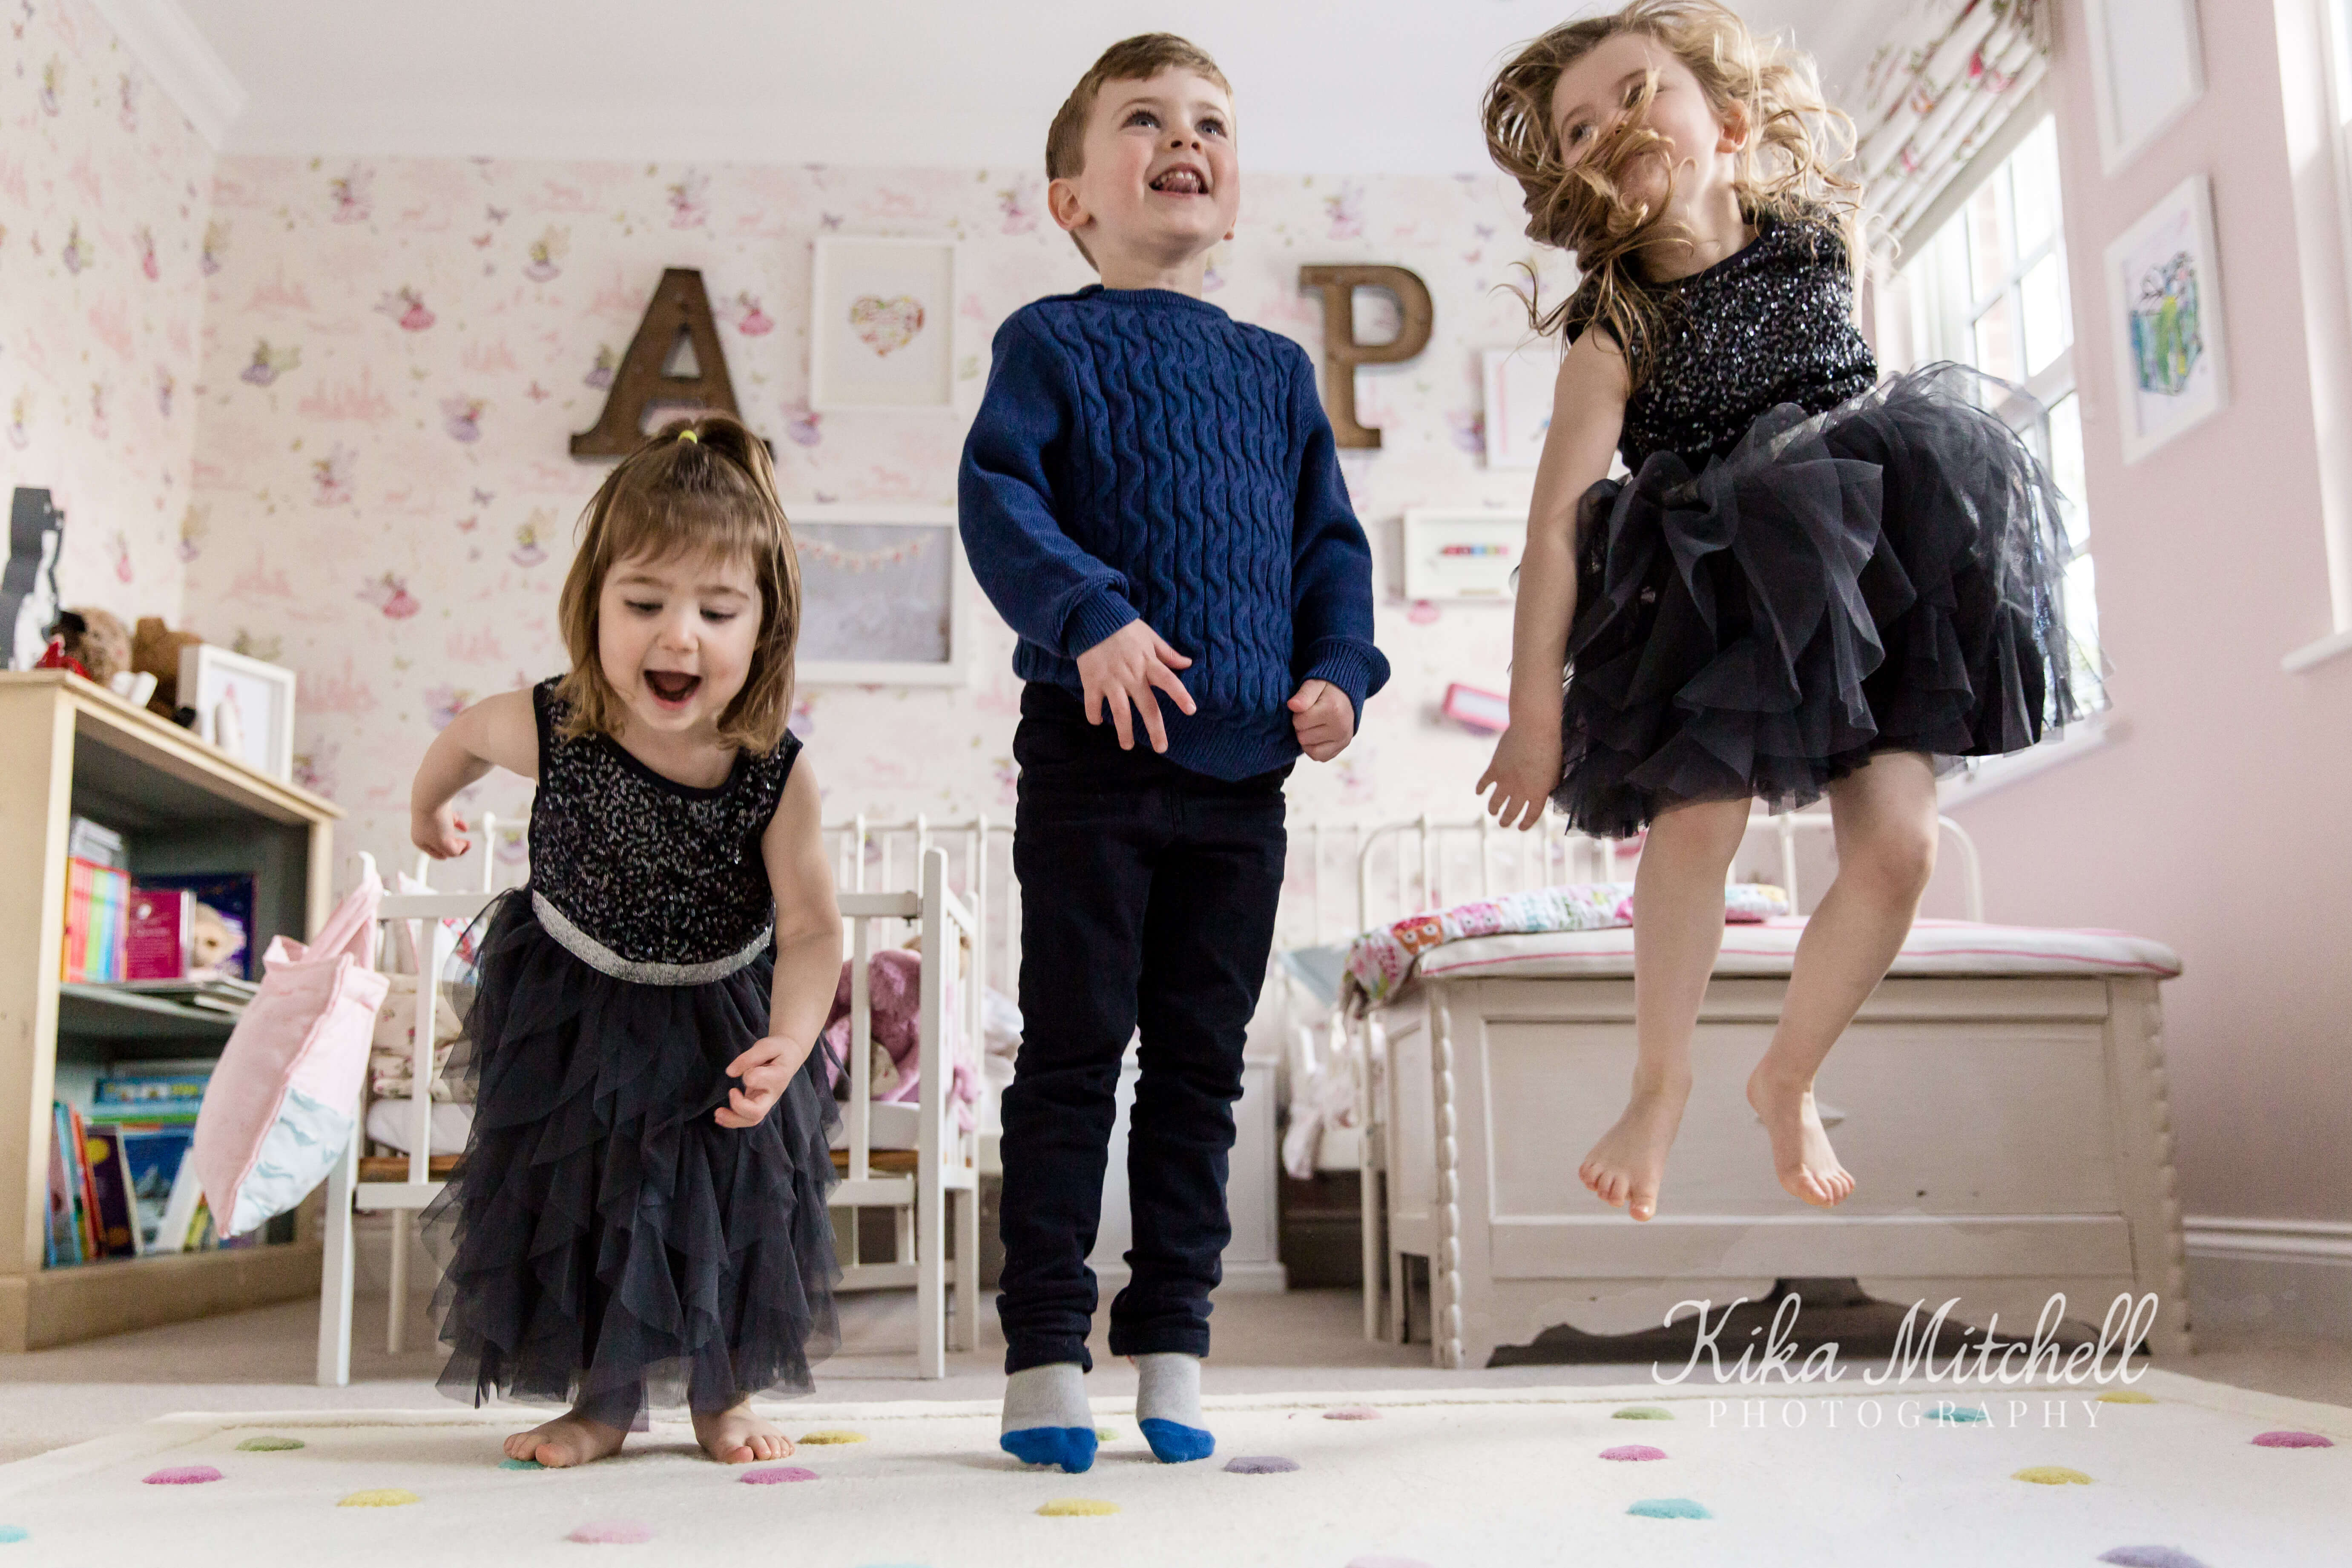 Advice from Chelmsford family photographer on what to wear for your family photoshoot with Kika Mitchell Photography